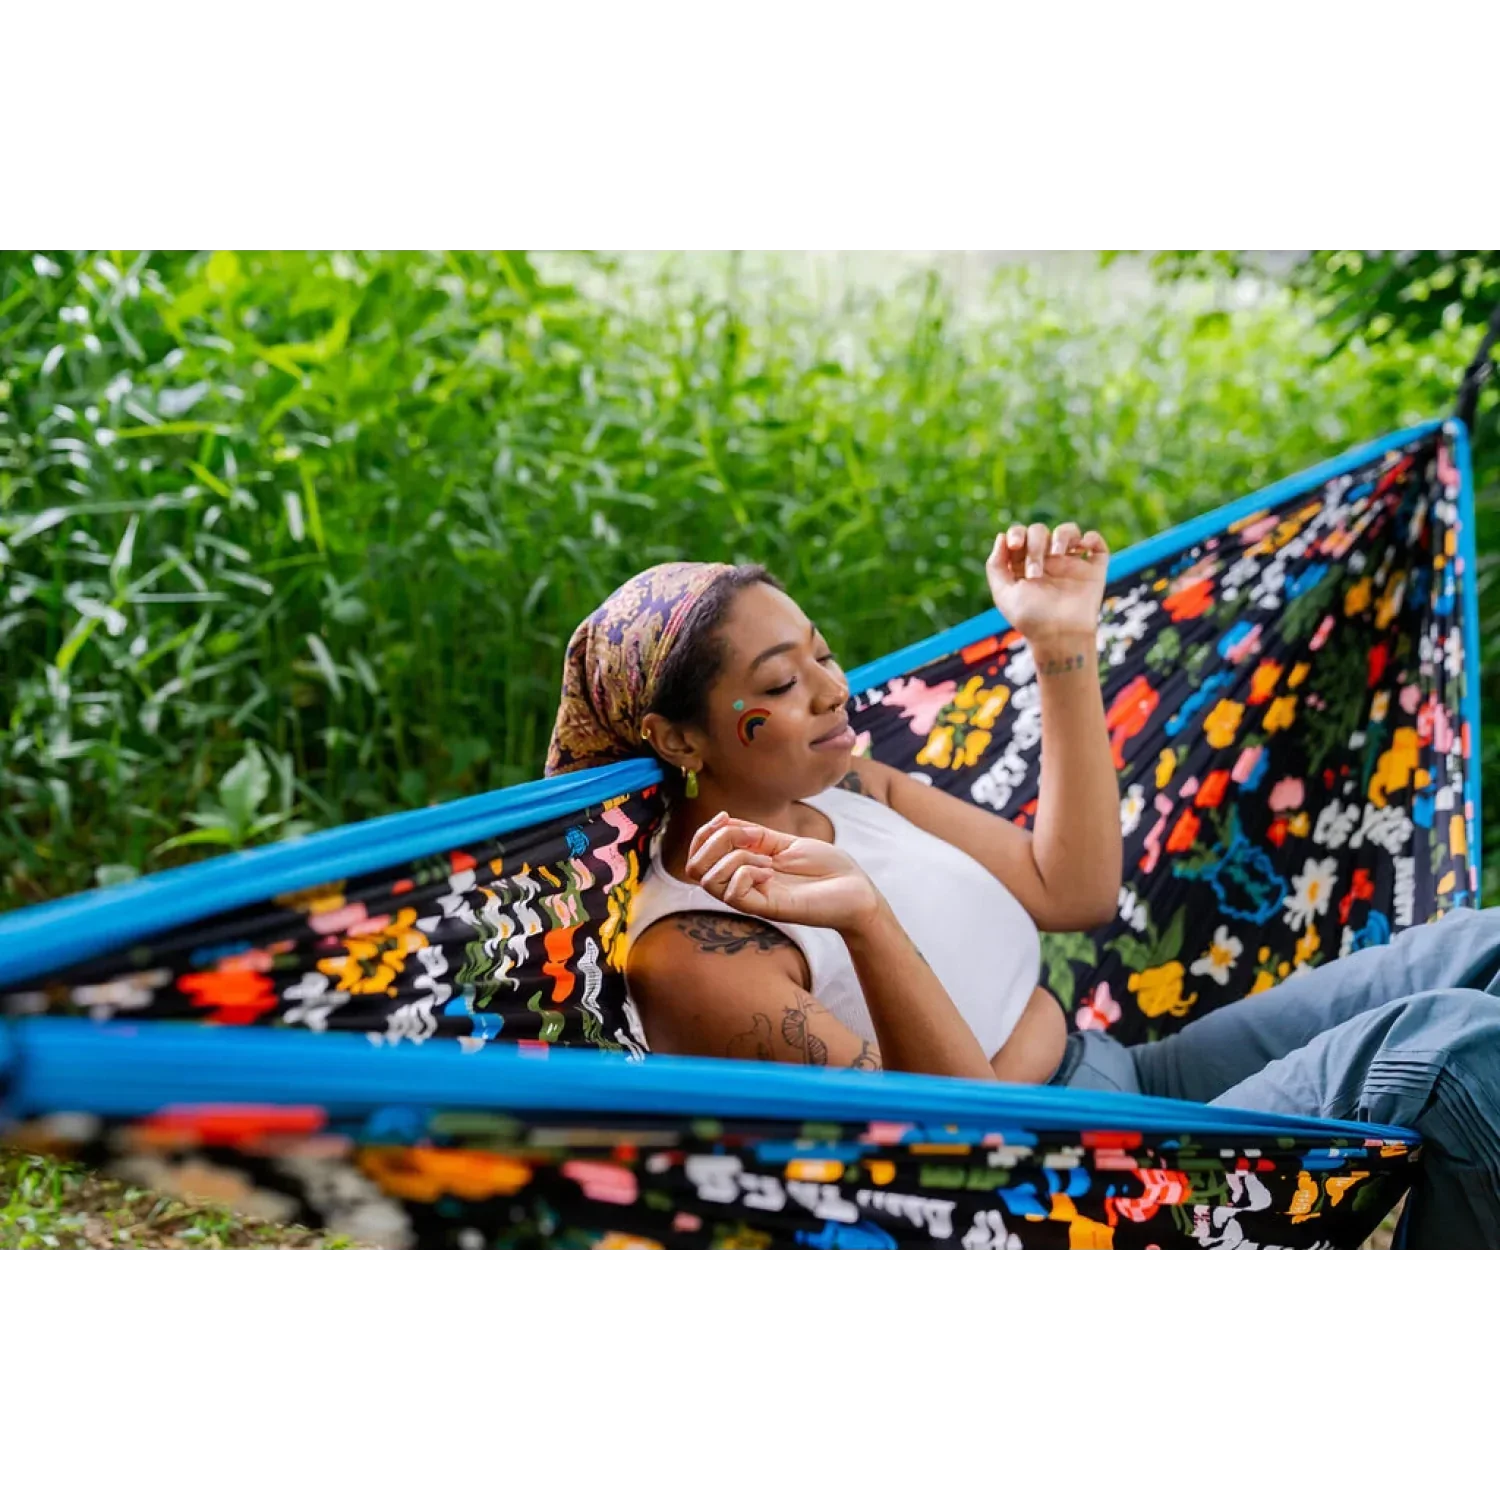 Eagles Nest Outfitters HARDGOODS - CAMP|HIKE|TRAVEL - HAMMOCKS DoubleNest Printed Hammock - Giving Back ROOM TO GROW - BRAVE TRAILS | TEAL